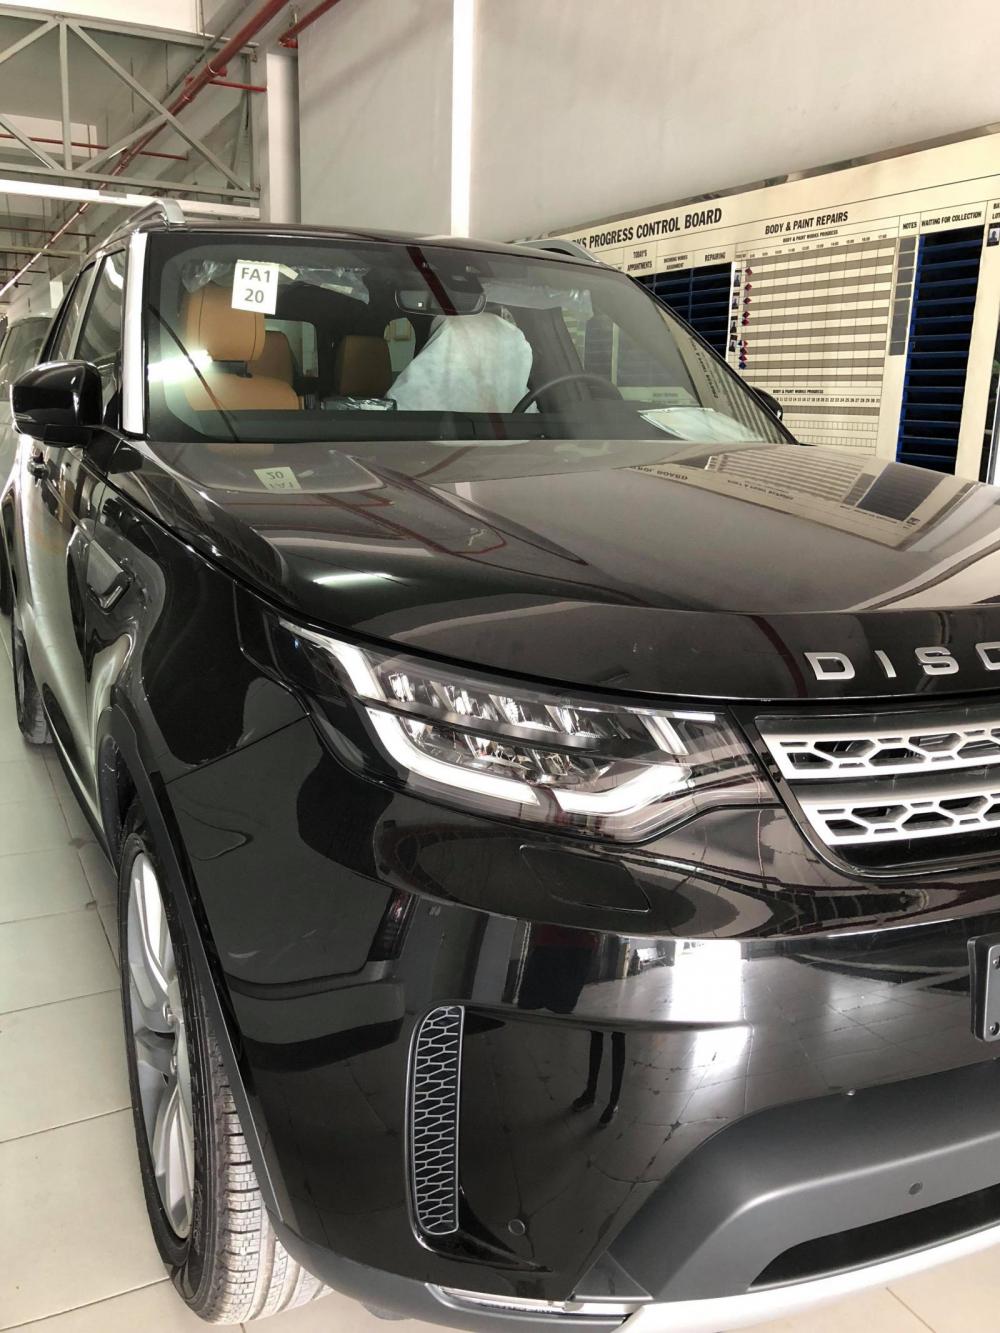 LandRover Discovery 2019 - New Discovery 0932222253 giá xe Land Rover Discovery HSE 2019, xe full size 7 chỗ màu đen, xanh, trắng giao ngay